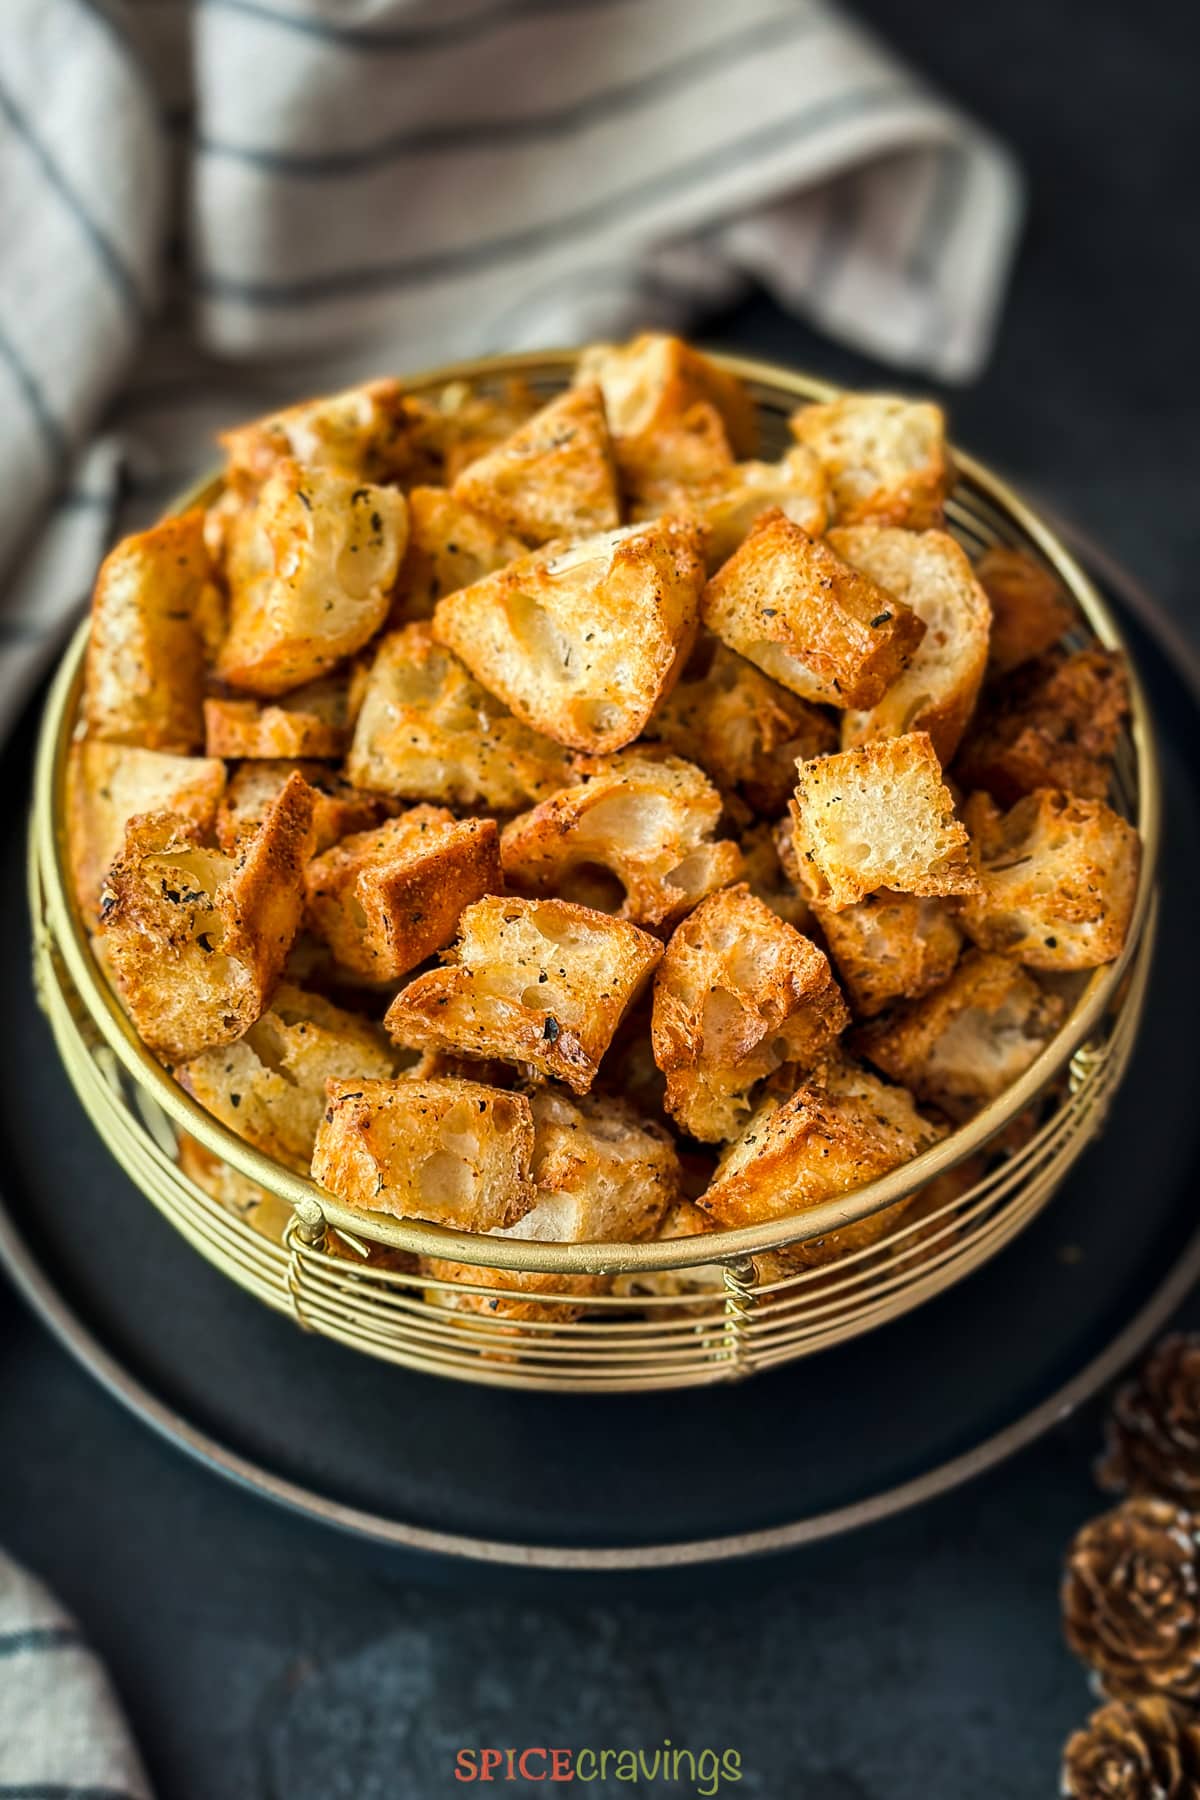 Side view of a croutons in a golden basket